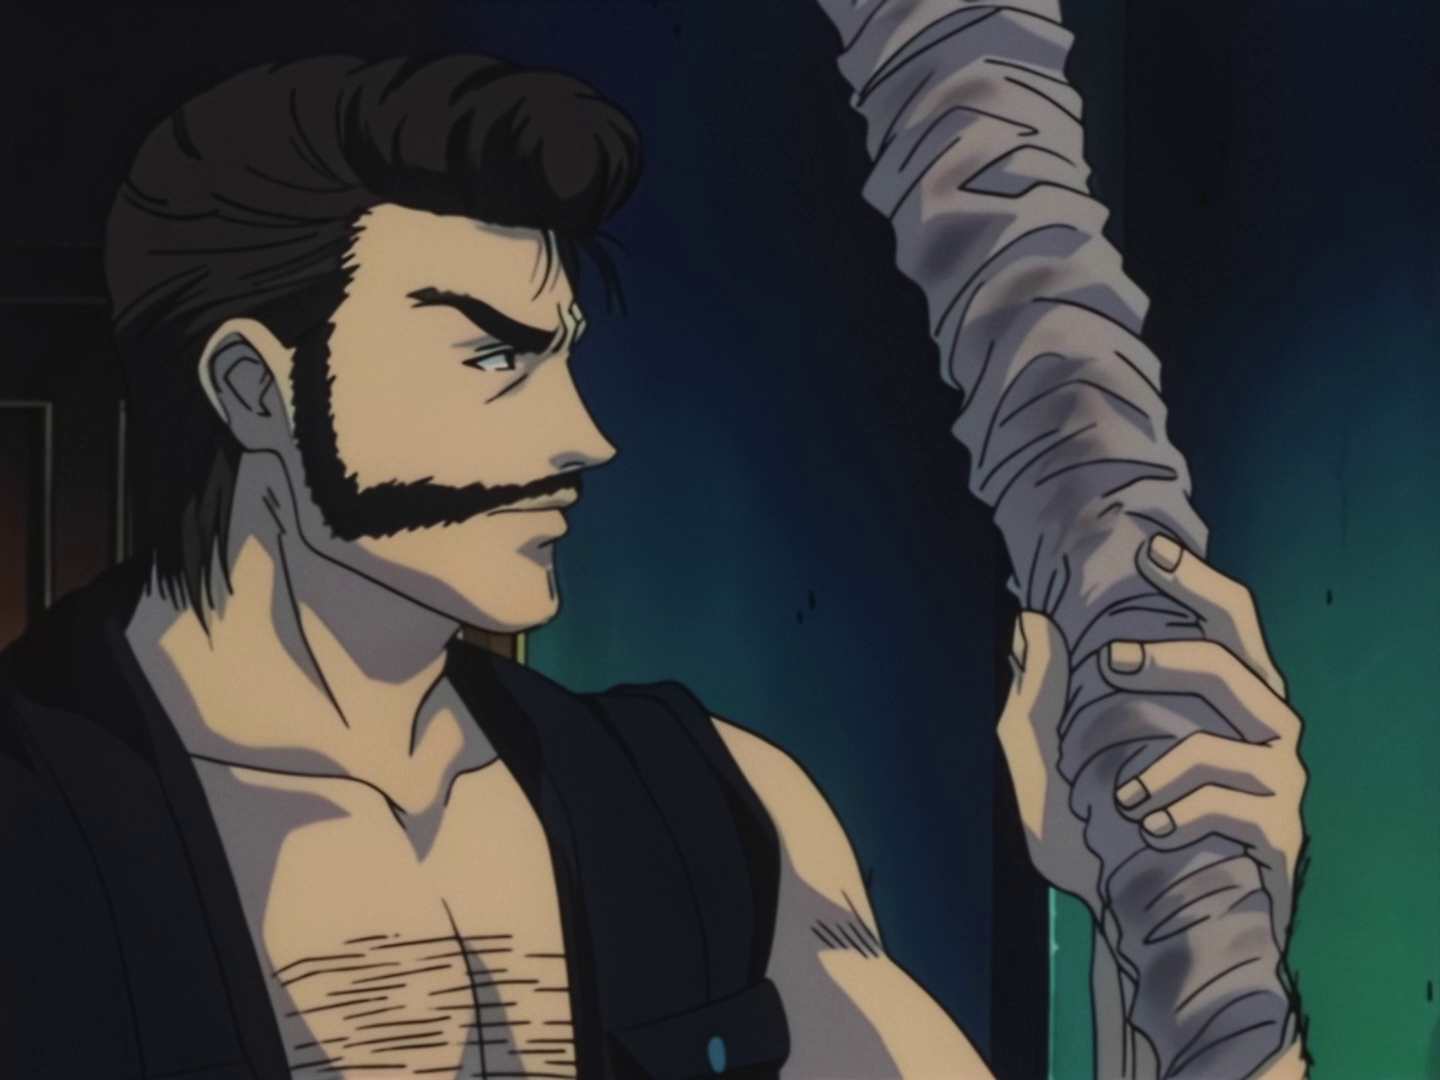 fussy-pig358: large anime man with large bulge and handsome beard and abs